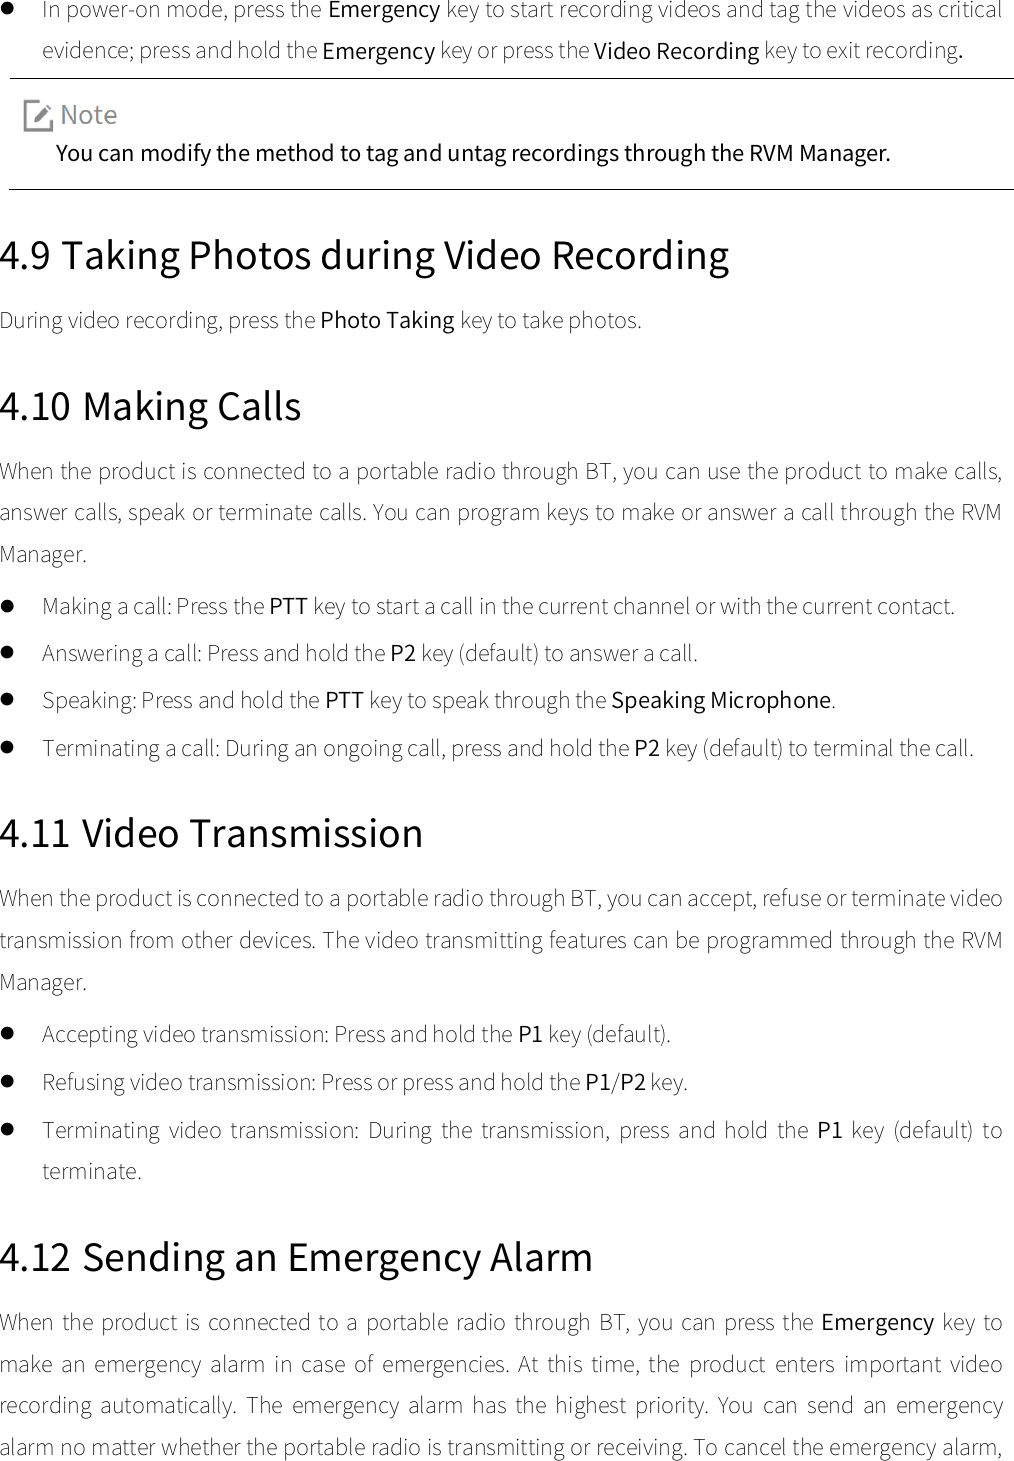   In power-on mode, press the Emergency key to start recording videos and tag the videos as critical evidence; press and hold the Emergency key or press the Video Recording key to exit recording.   You can modify the method to tag and untag recordings through the RVM Manager.  4.9 Taking Photos during Video Recording During video recording, press the Photo Taking key to take photos.   4.10 Making Calls When the product is connected to a portable radio through BT, you can use the product to make calls, answer calls, speak or terminate calls. You can program keys to make or answer a call through the RVM Manager.    Making a call: Press the PTT key to start a call in the current channel or with the current contact.    Answering a call: Press and hold the P2 key (default) to answer a call.    Speaking: Press and hold the PTT key to speak through the Speaking Microphone.    Terminating a call: During an ongoing call, press and hold the P2 key (default) to terminal the call.   4.11 Video Transmission When the product is connected to a portable radio through BT, you can accept, refuse or terminate video transmission from other devices. The video transmitting features can be programmed through the RVM Manager.    Accepting video transmission: Press and hold the P1 key (default).    Refusing video transmission: Press or press and hold the P1/P2 key.    Terminating  video  transmission:  During  the  transmission,  press  and  hold  the  P1 key  (default)  to terminate.   4.12 Sending an Emergency Alarm When the product is connected to  a portable radio through BT, you can press the Emergency key to make  an  emergency  alarm  in  case  of  emergencies.  At  this  time,  the  product  enters  important  video recording  automatically.  The  emergency  alarm  has  the  highest  priority.  You  can  send  an  emergency alarm no matter whether the portable radio is transmitting or receiving. To cancel the emergency alarm, 